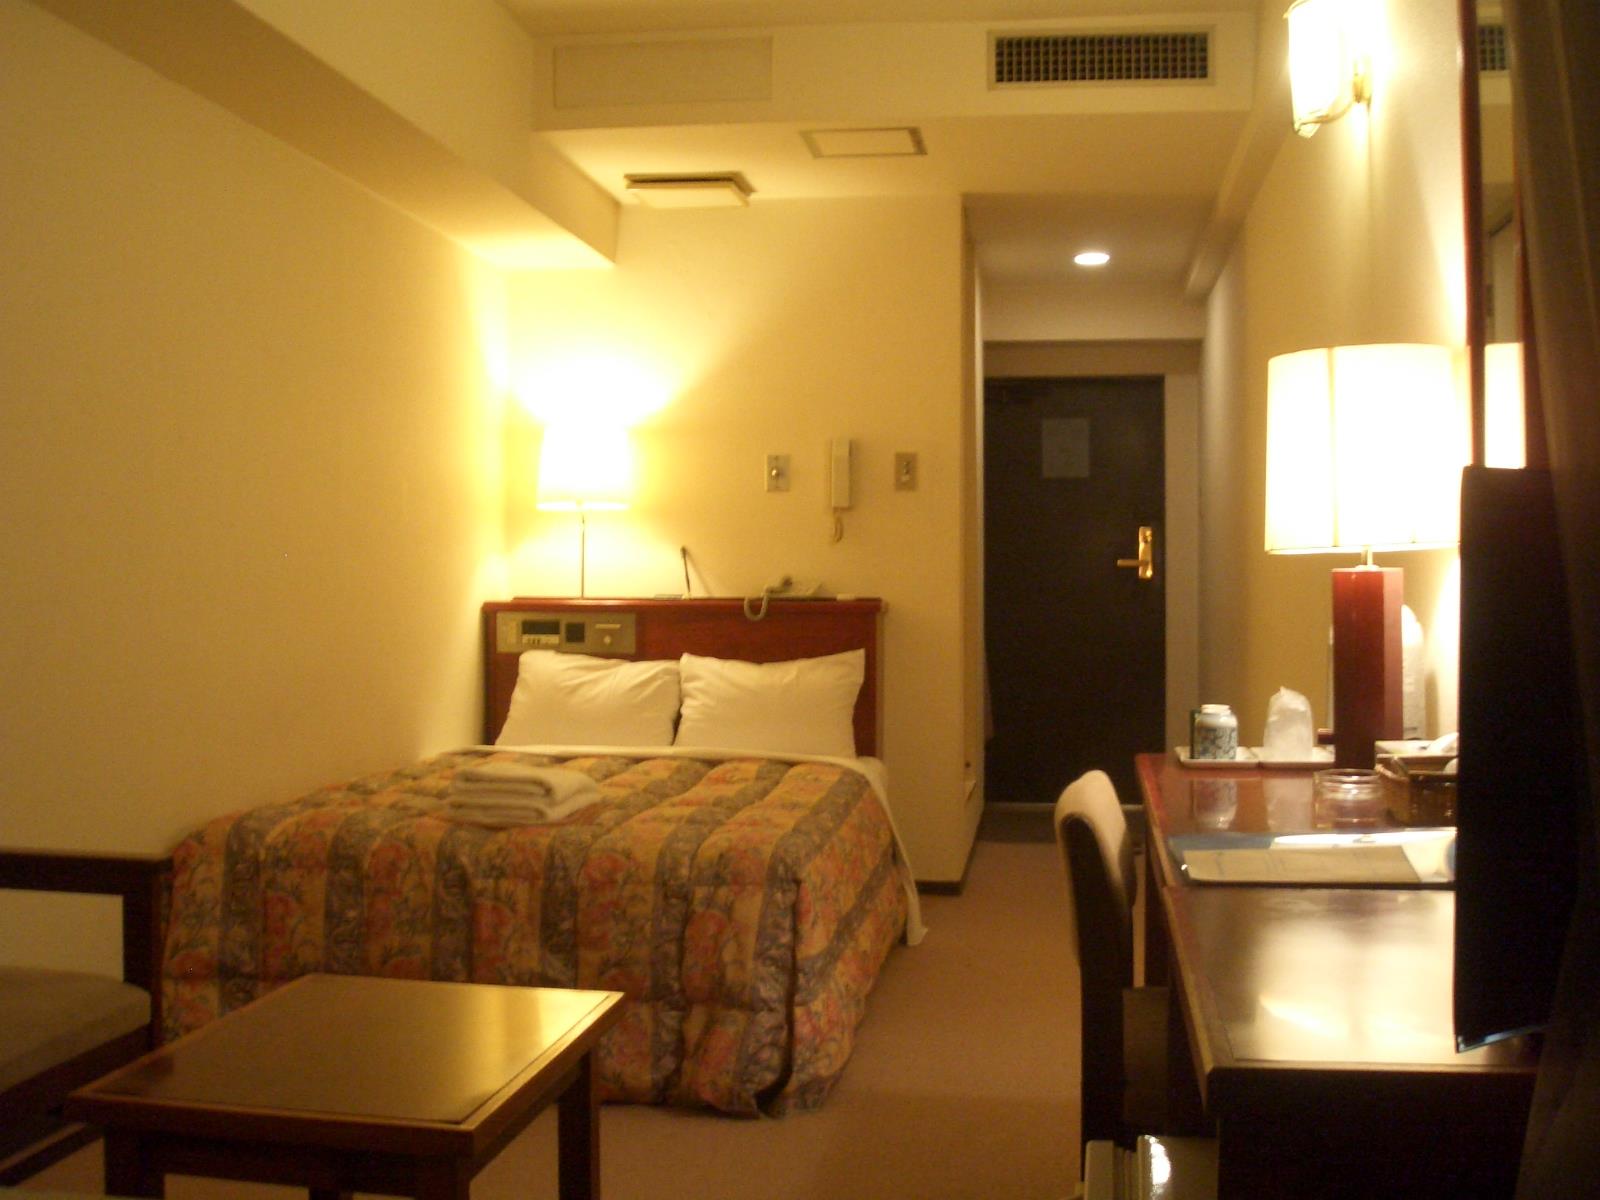 Sky Court Koiwa Hotel Japan FAQ 2017, What facilities are there in Sky Court Koiwa Hotel Japan 2017, What Languages Spoken are Supported in Sky Court Koiwa Hotel Japan 2017, Which payment cards are accepted in Sky Court Koiwa Hotel Japan , Japan Sky Court Koiwa Hotel room facilities and services Q&A 2017, Japan Sky Court Koiwa Hotel online booking services 2017, Japan Sky Court Koiwa Hotel address 2017, Japan Sky Court Koiwa Hotel telephone number 2017,Japan Sky Court Koiwa Hotel map 2017, Japan Sky Court Koiwa Hotel traffic guide 2017, how to go Japan Sky Court Koiwa Hotel, Japan Sky Court Koiwa Hotel booking online 2017, Japan Sky Court Koiwa Hotel room types 2017.